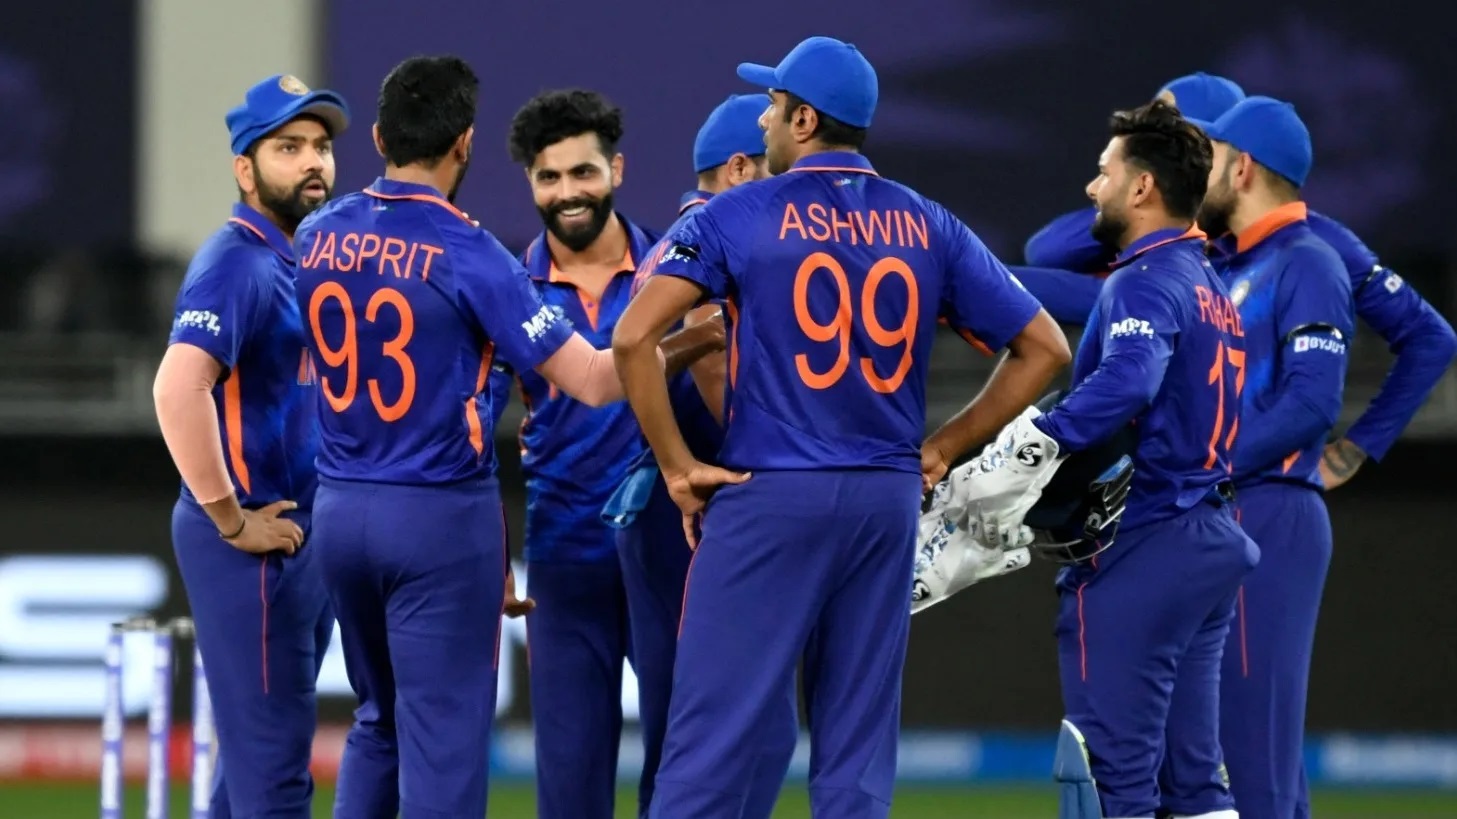 India vs South Africa T20 Series: All you want to know about India team selection, South Africa squad, IND-SA T20 Series schedule, venue, live streaming & live broadcast details